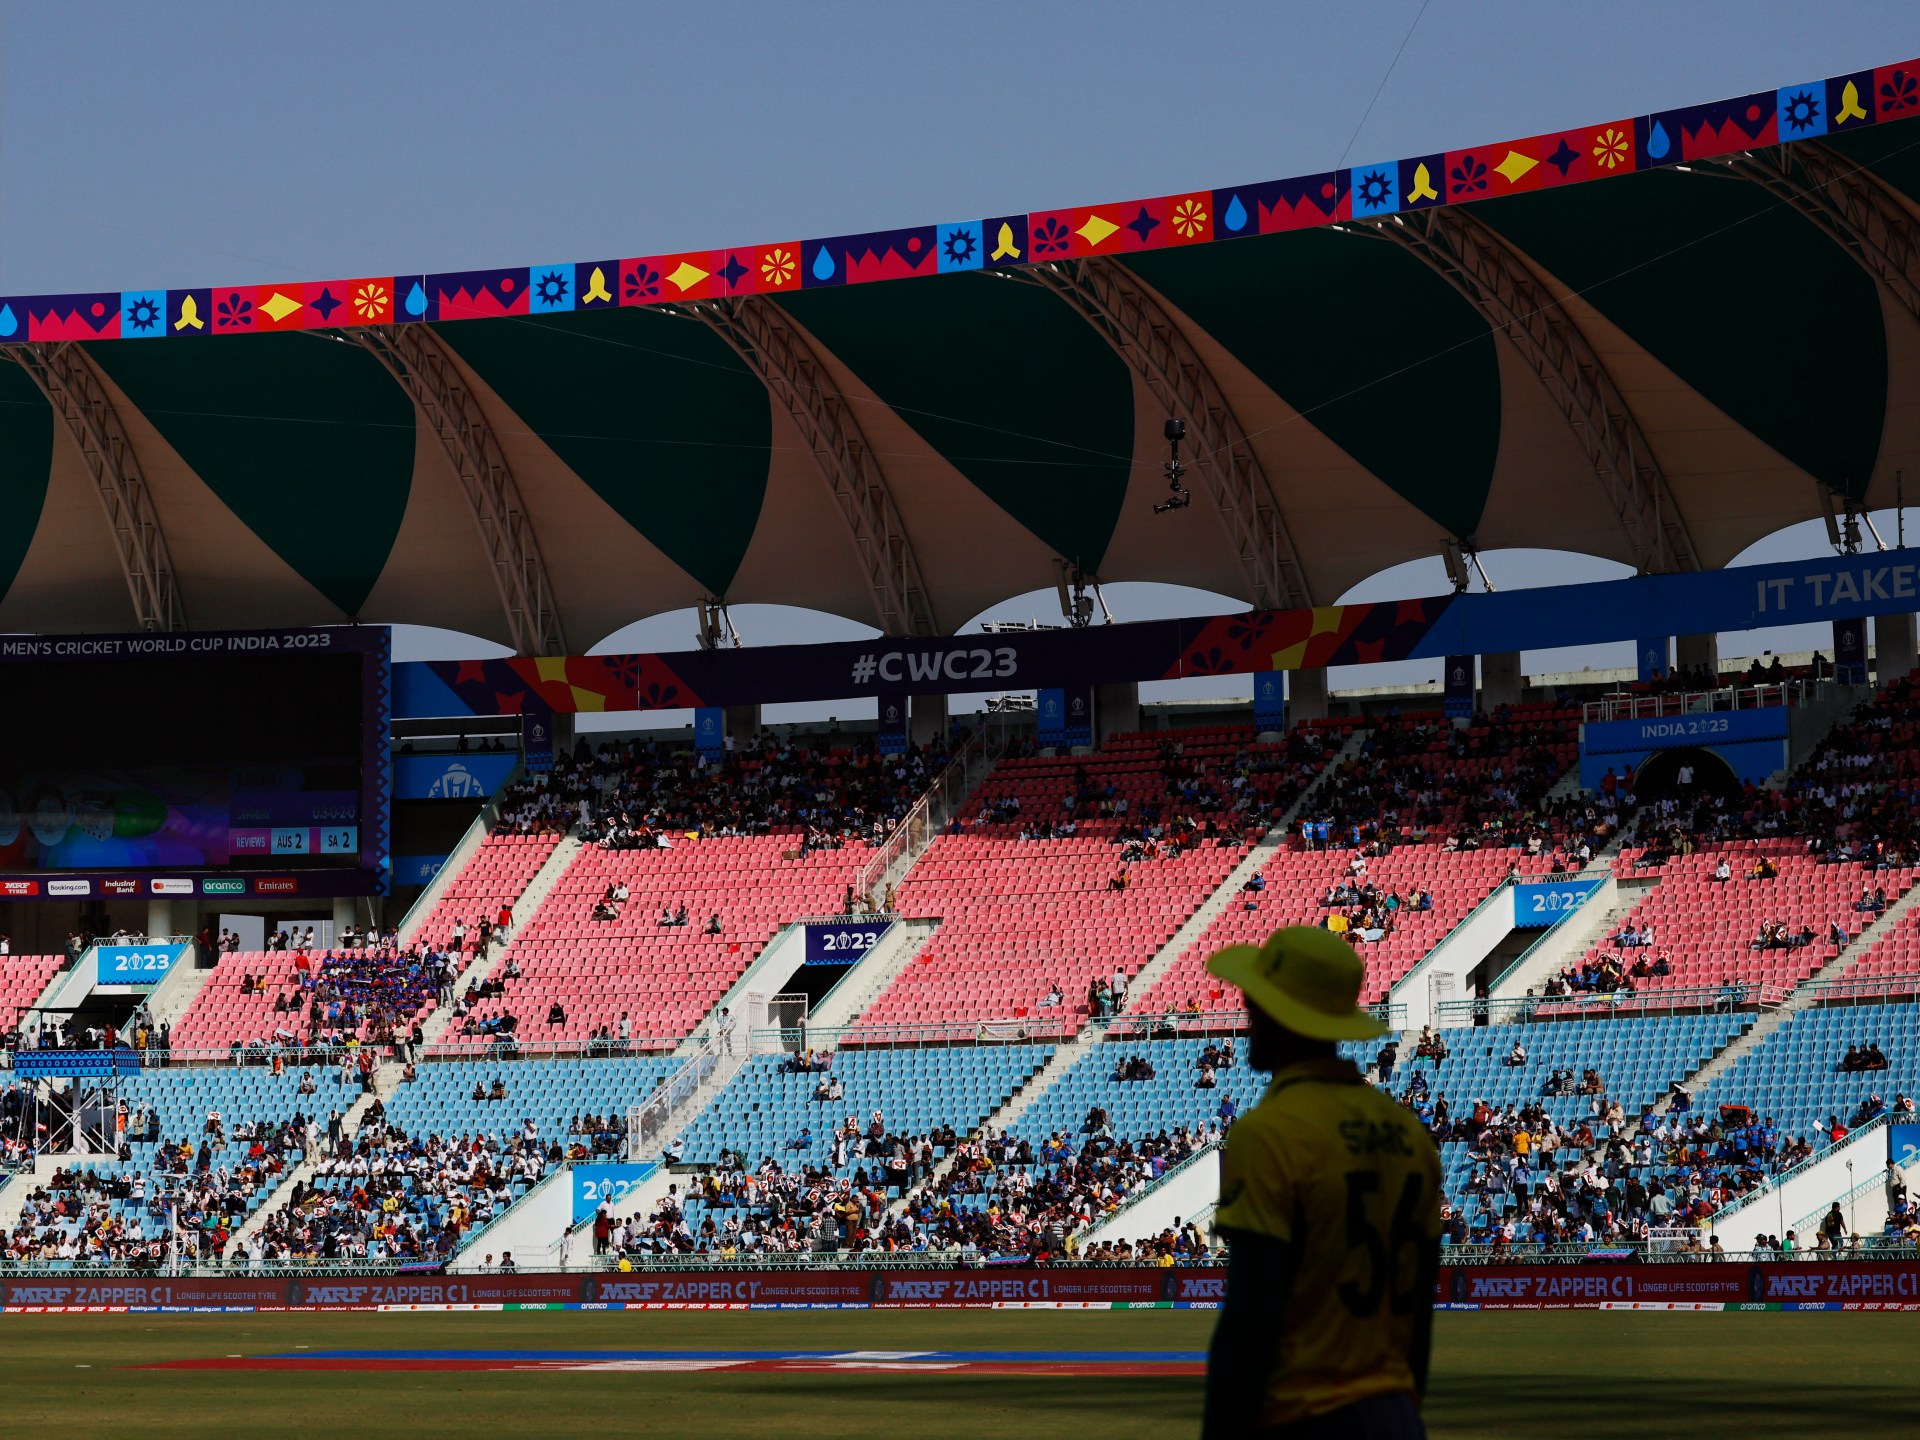 ‘I expected better’: Why so many empty seats at India’s Cricket World Cup? | ICC Cricket World Cup News